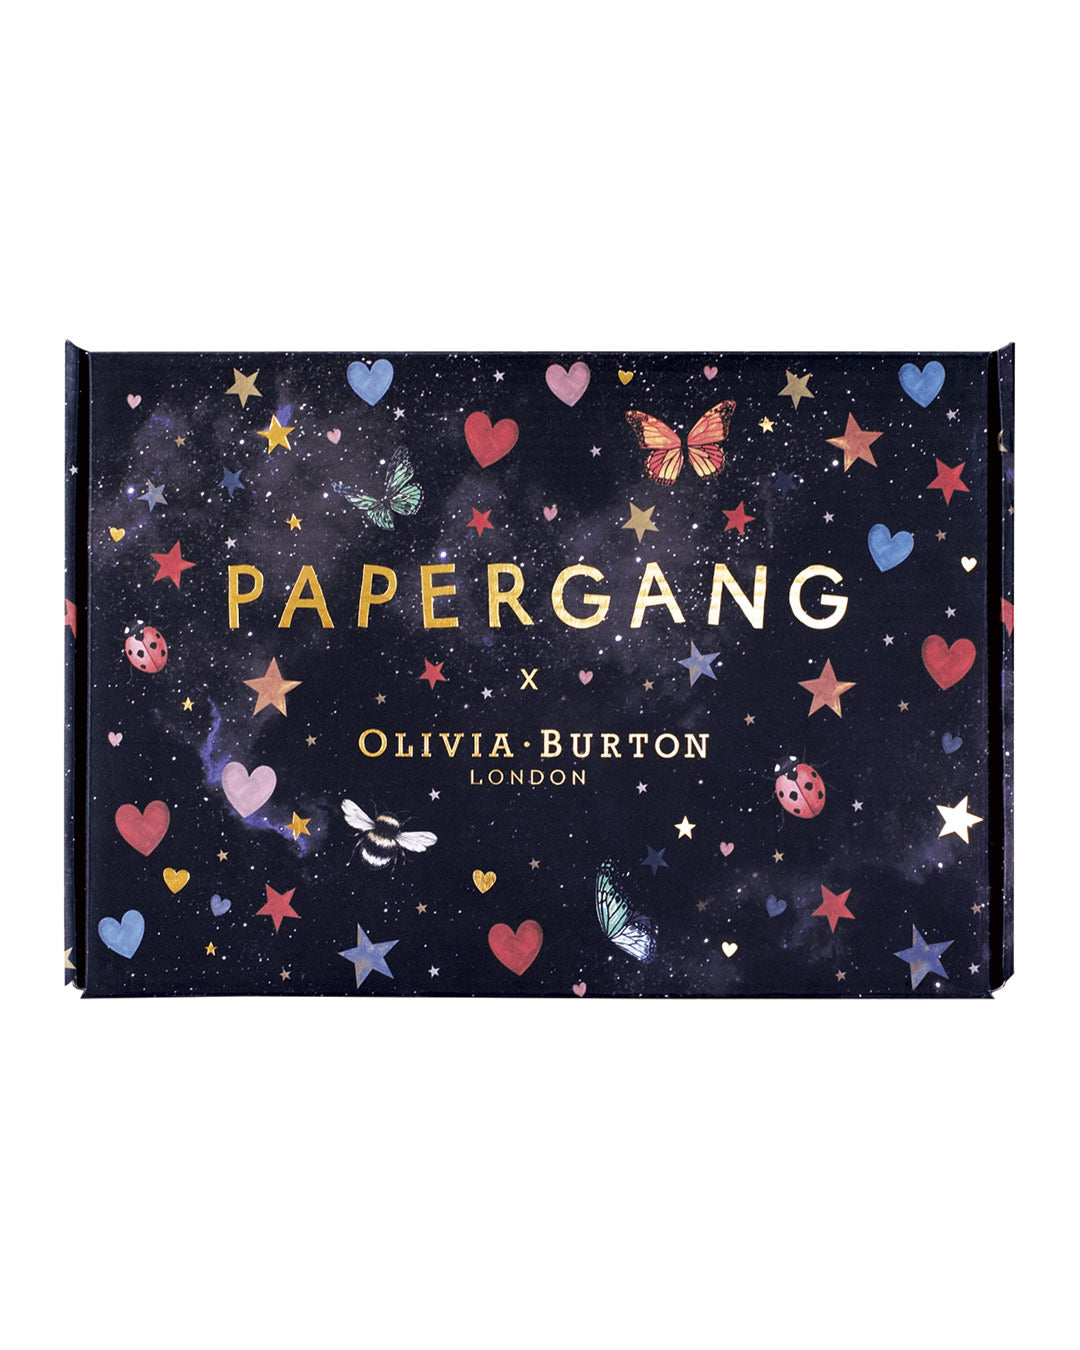 Papergang: A Stationery Selection Box - Night Garden with Olivia Burton Edition